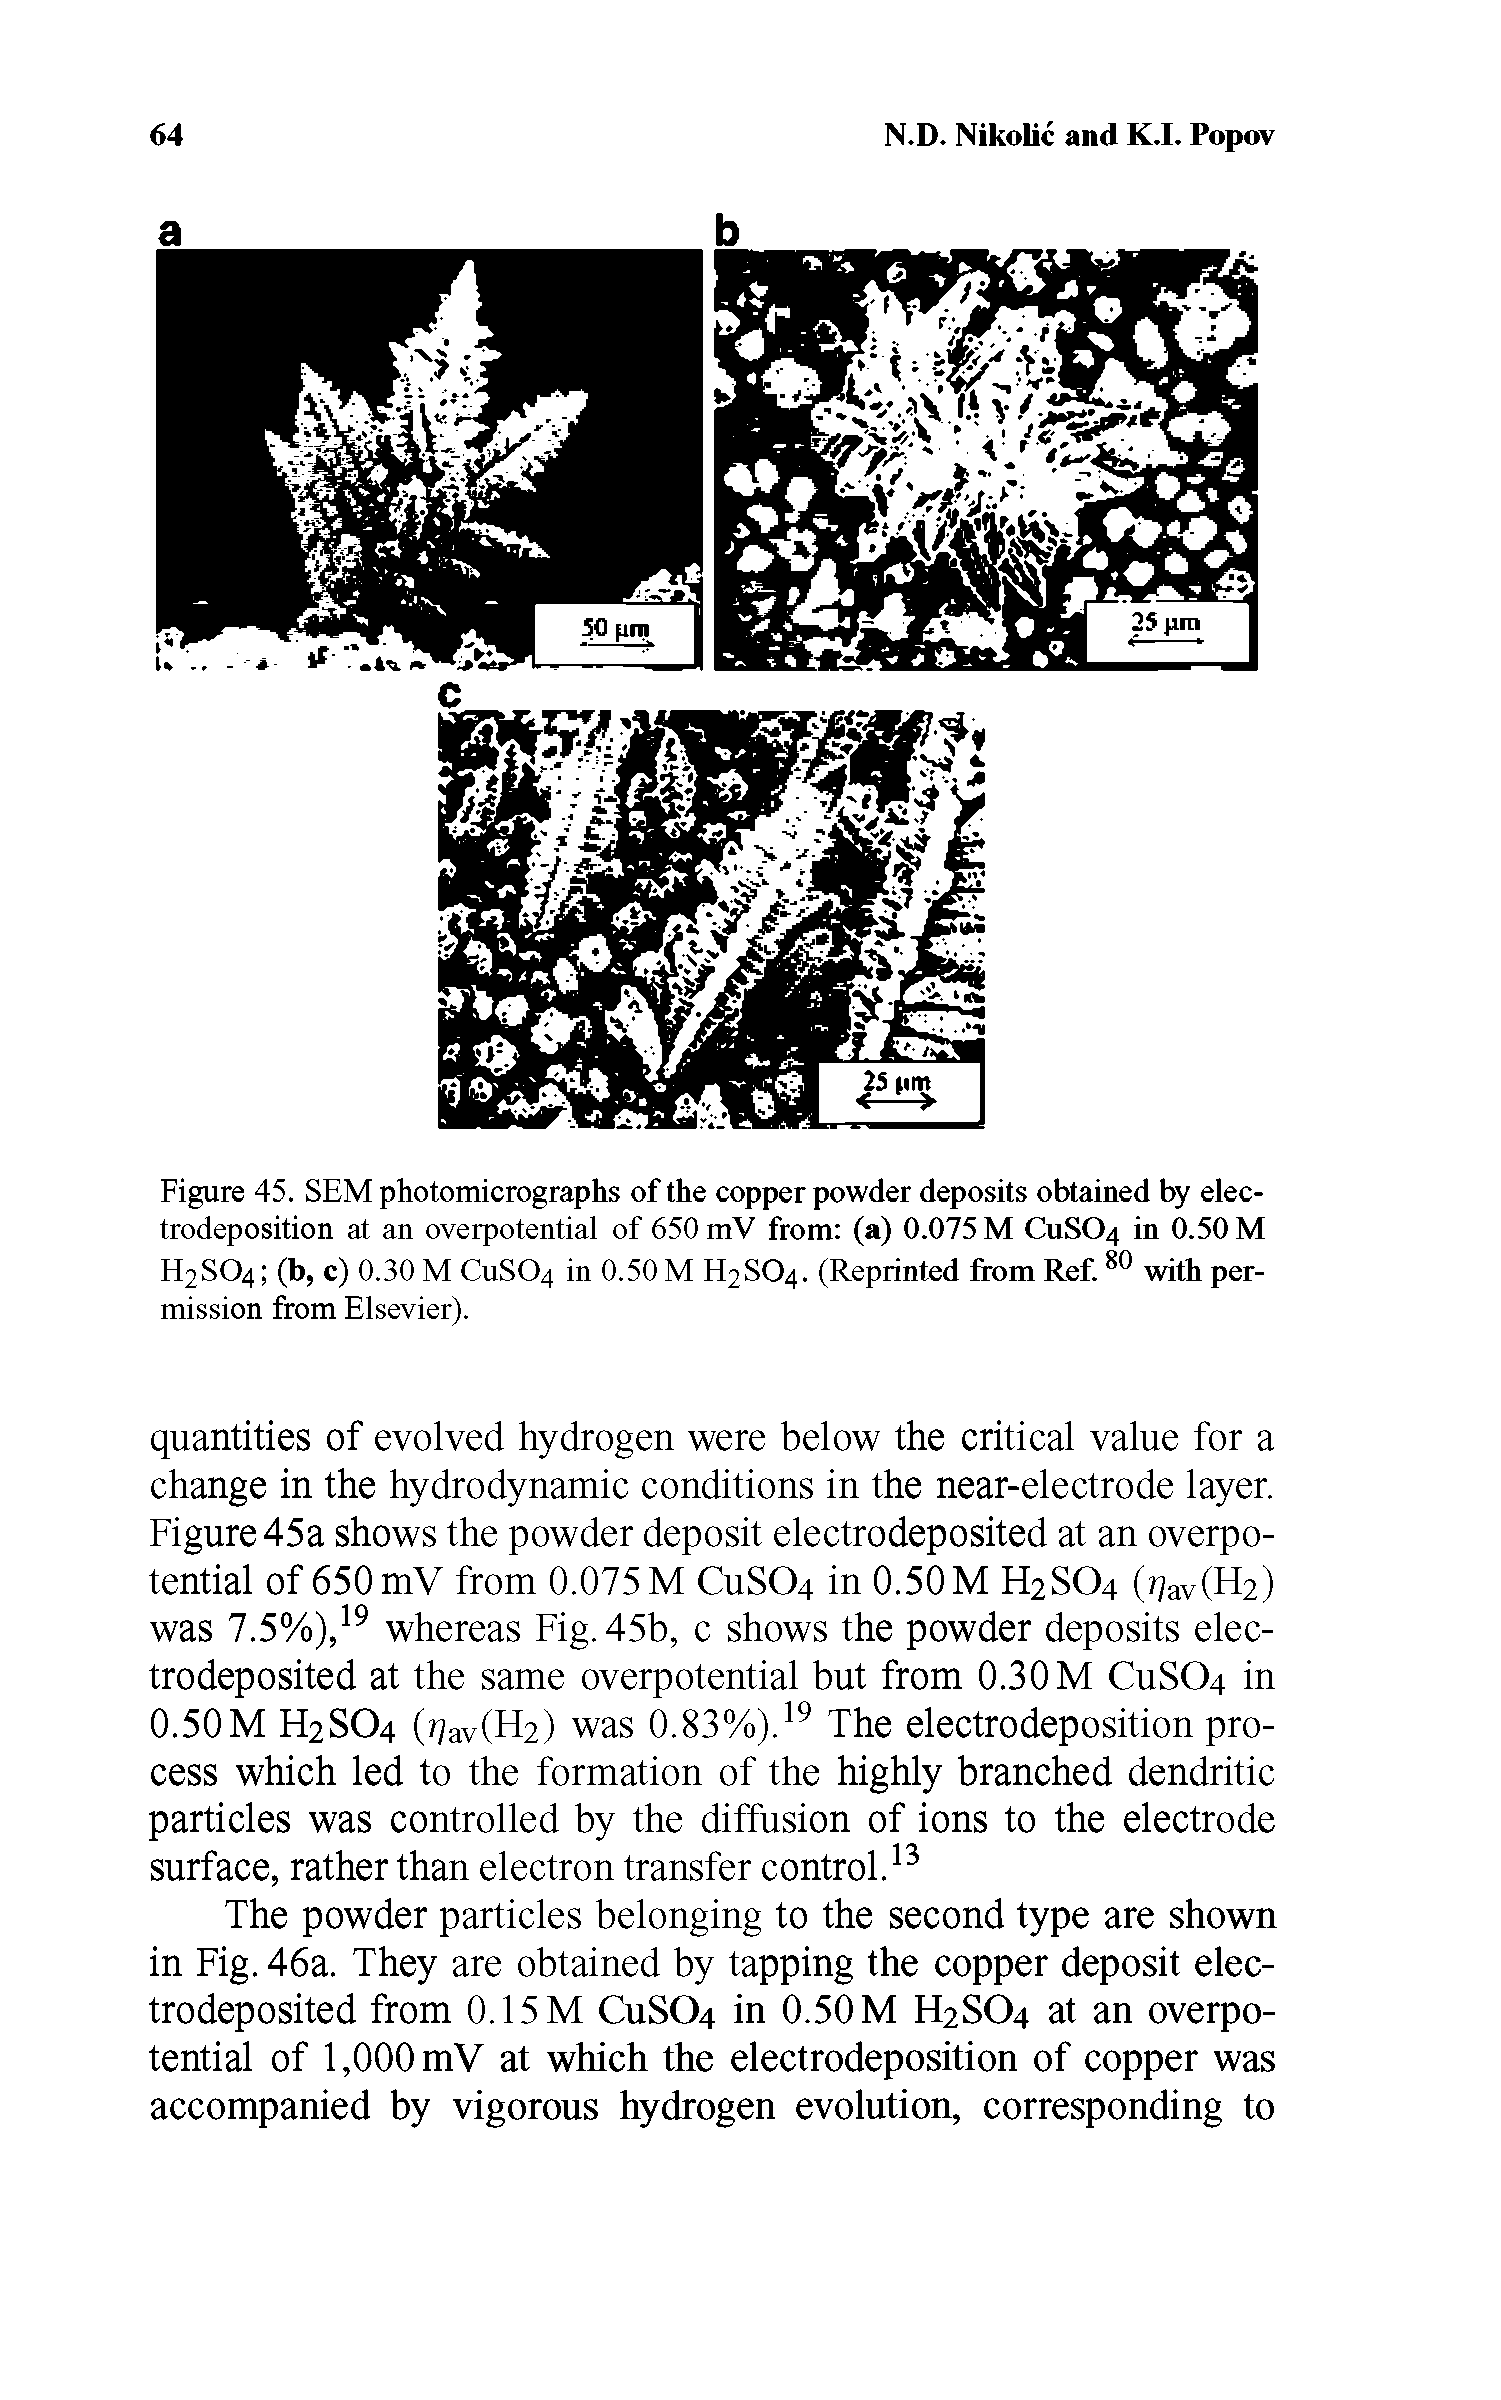 Figure 45. SEM photomicrographs of the copper powder deposits obtained by electrodeposition at an overpotential of 650 mV from (a) 0.075 M CUSO4 in 0.50 M H2SO4 (b, c) 0.30 M CUSO4 in 0.50 M H2SO4. (Reprinted from Ref.80 with permission from Elsevier).